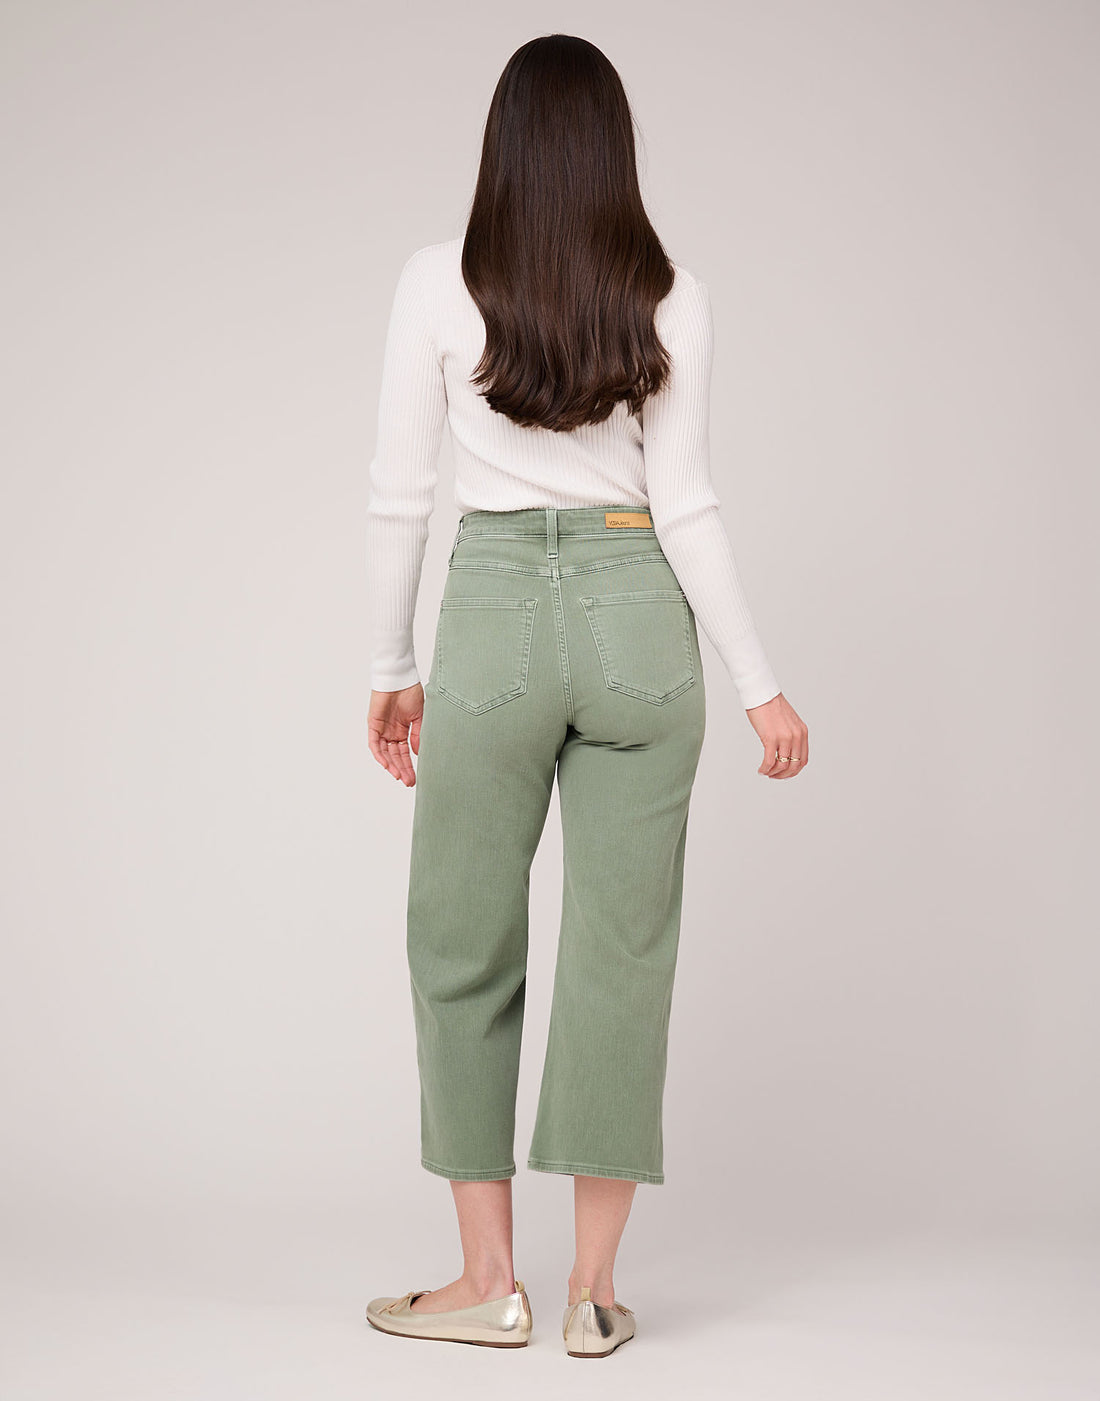 Jeans Lily 2538 Beach Grass Yoga Jeans